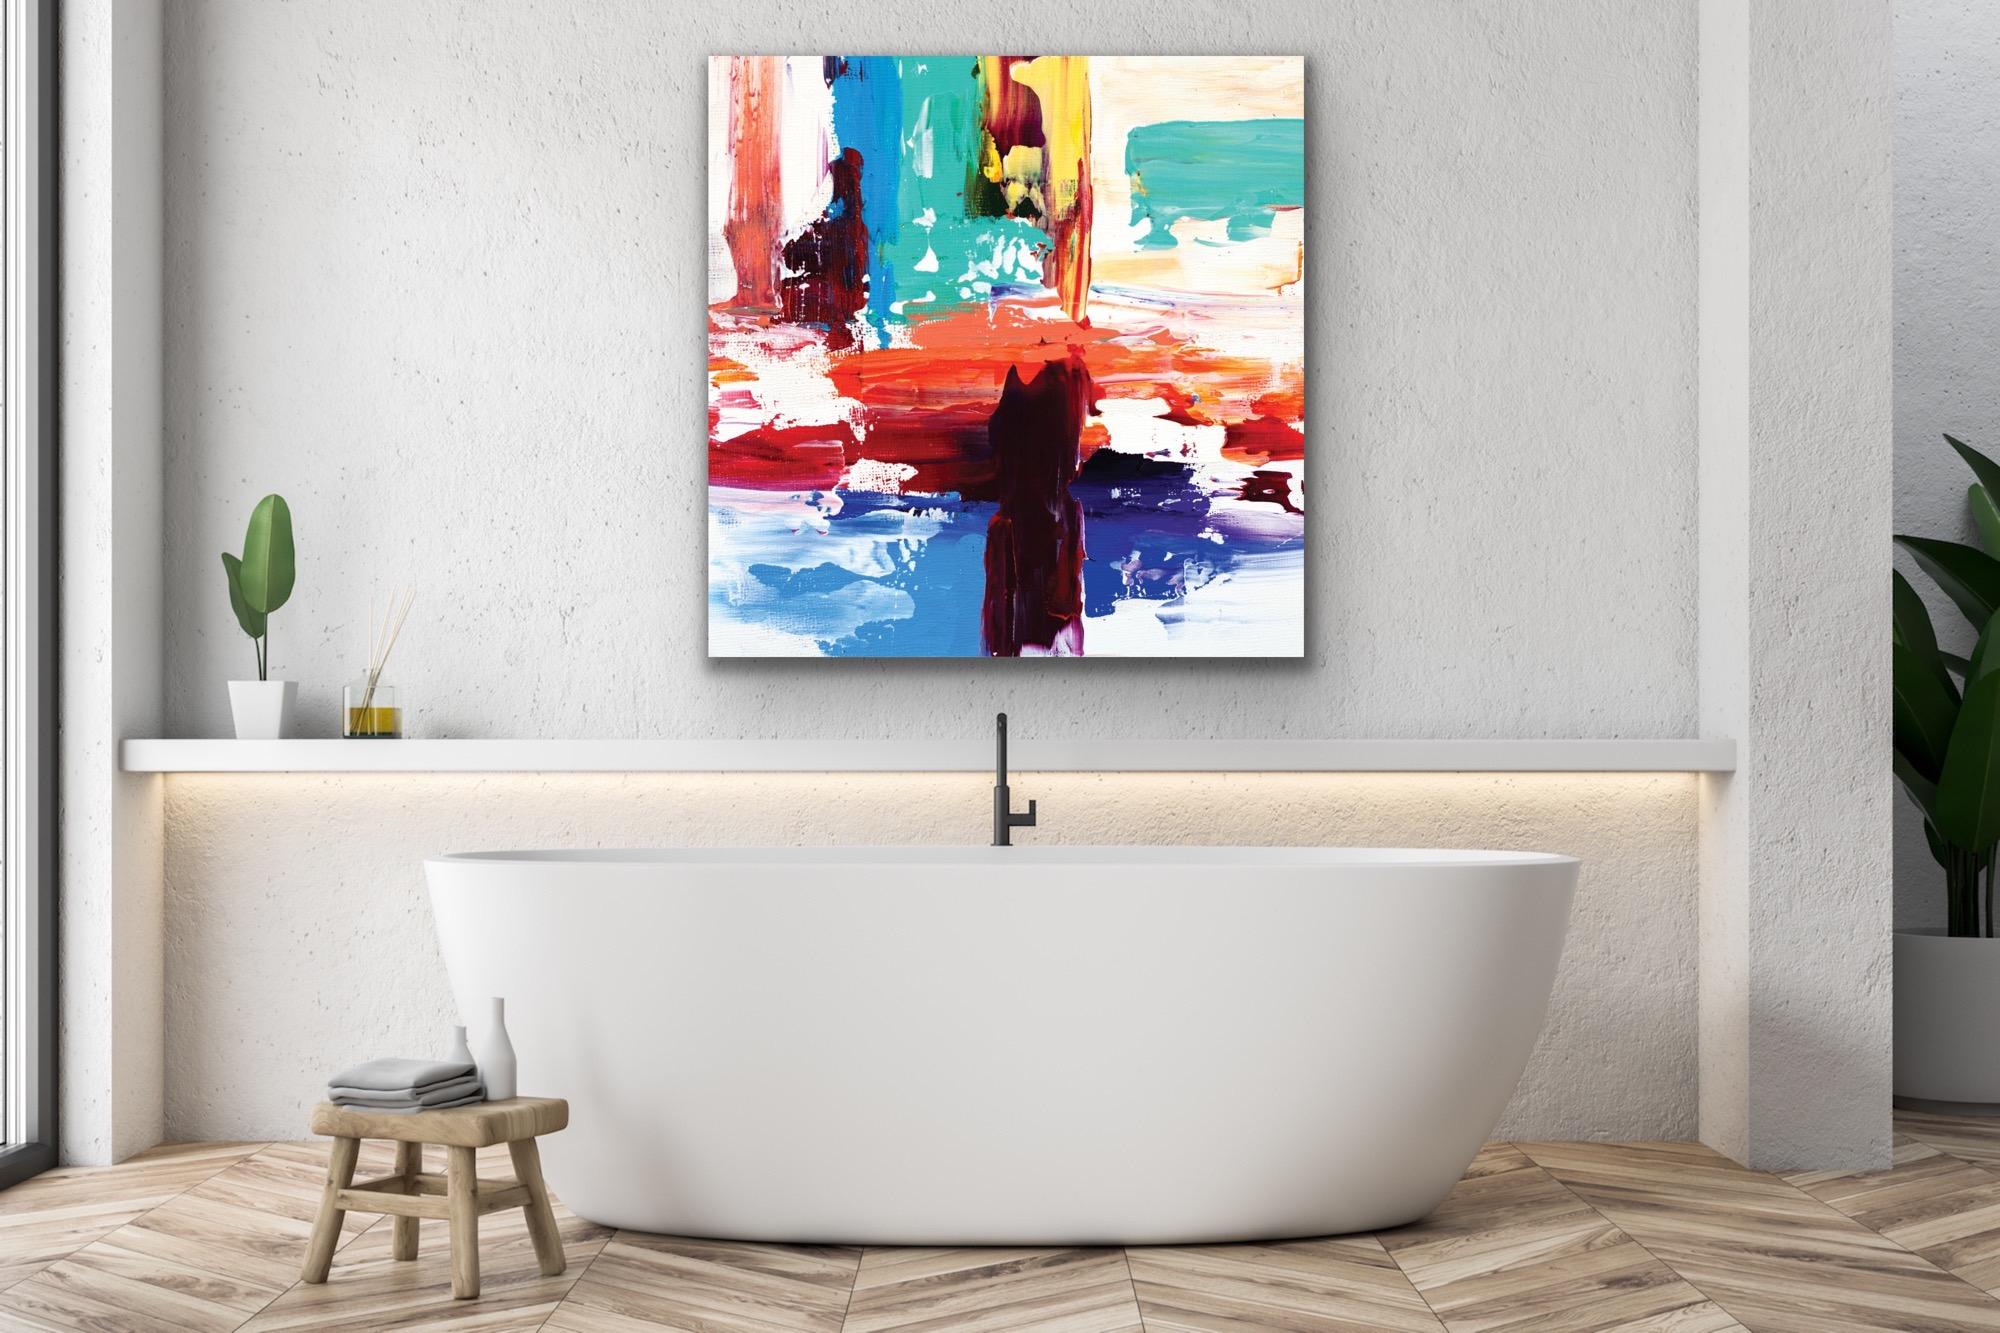 This contemporary modern abstract painting is printed on a lightweight metal composite and comes ready to hang. This vibrant composition can be hung both indoor and outdoor as it is weather resistant.

-Artist: Celeste Reiter
-Open Edition - Signed